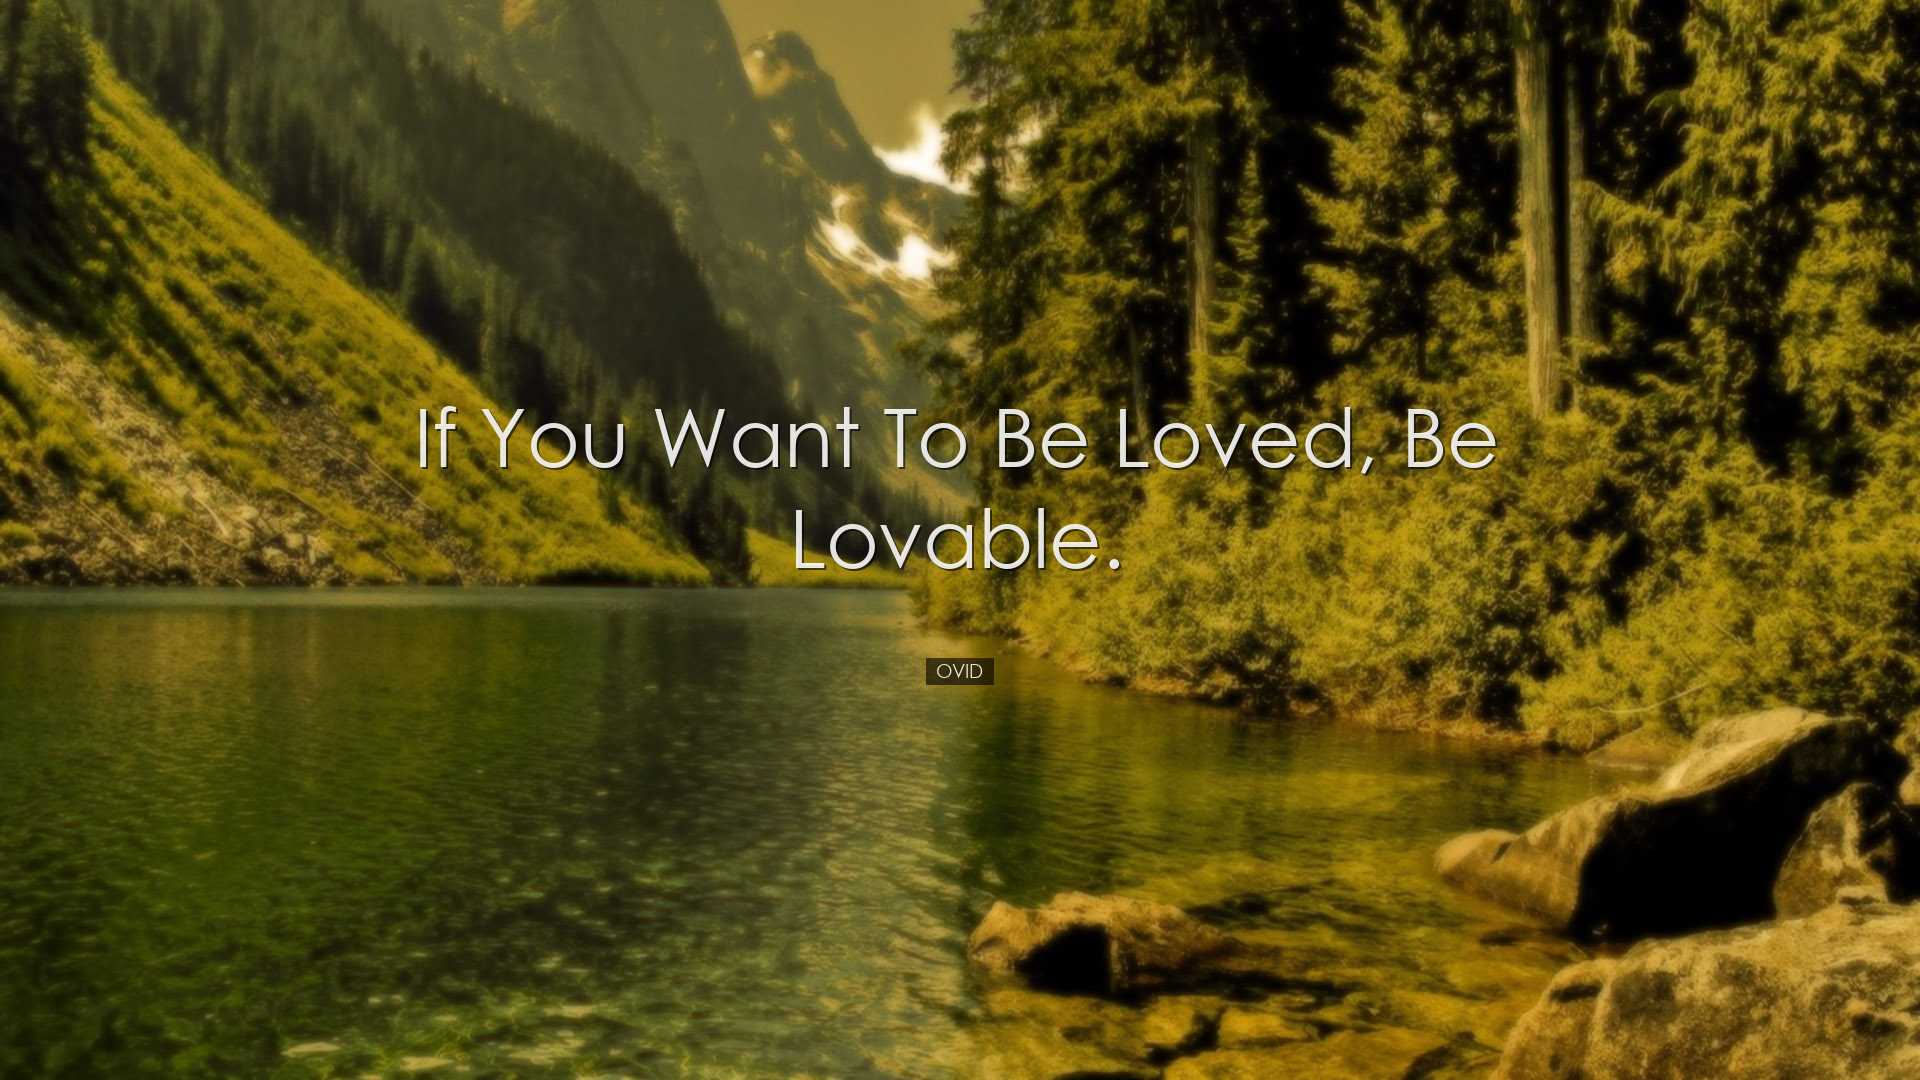 If you want to be loved, be lovable. - Ovid